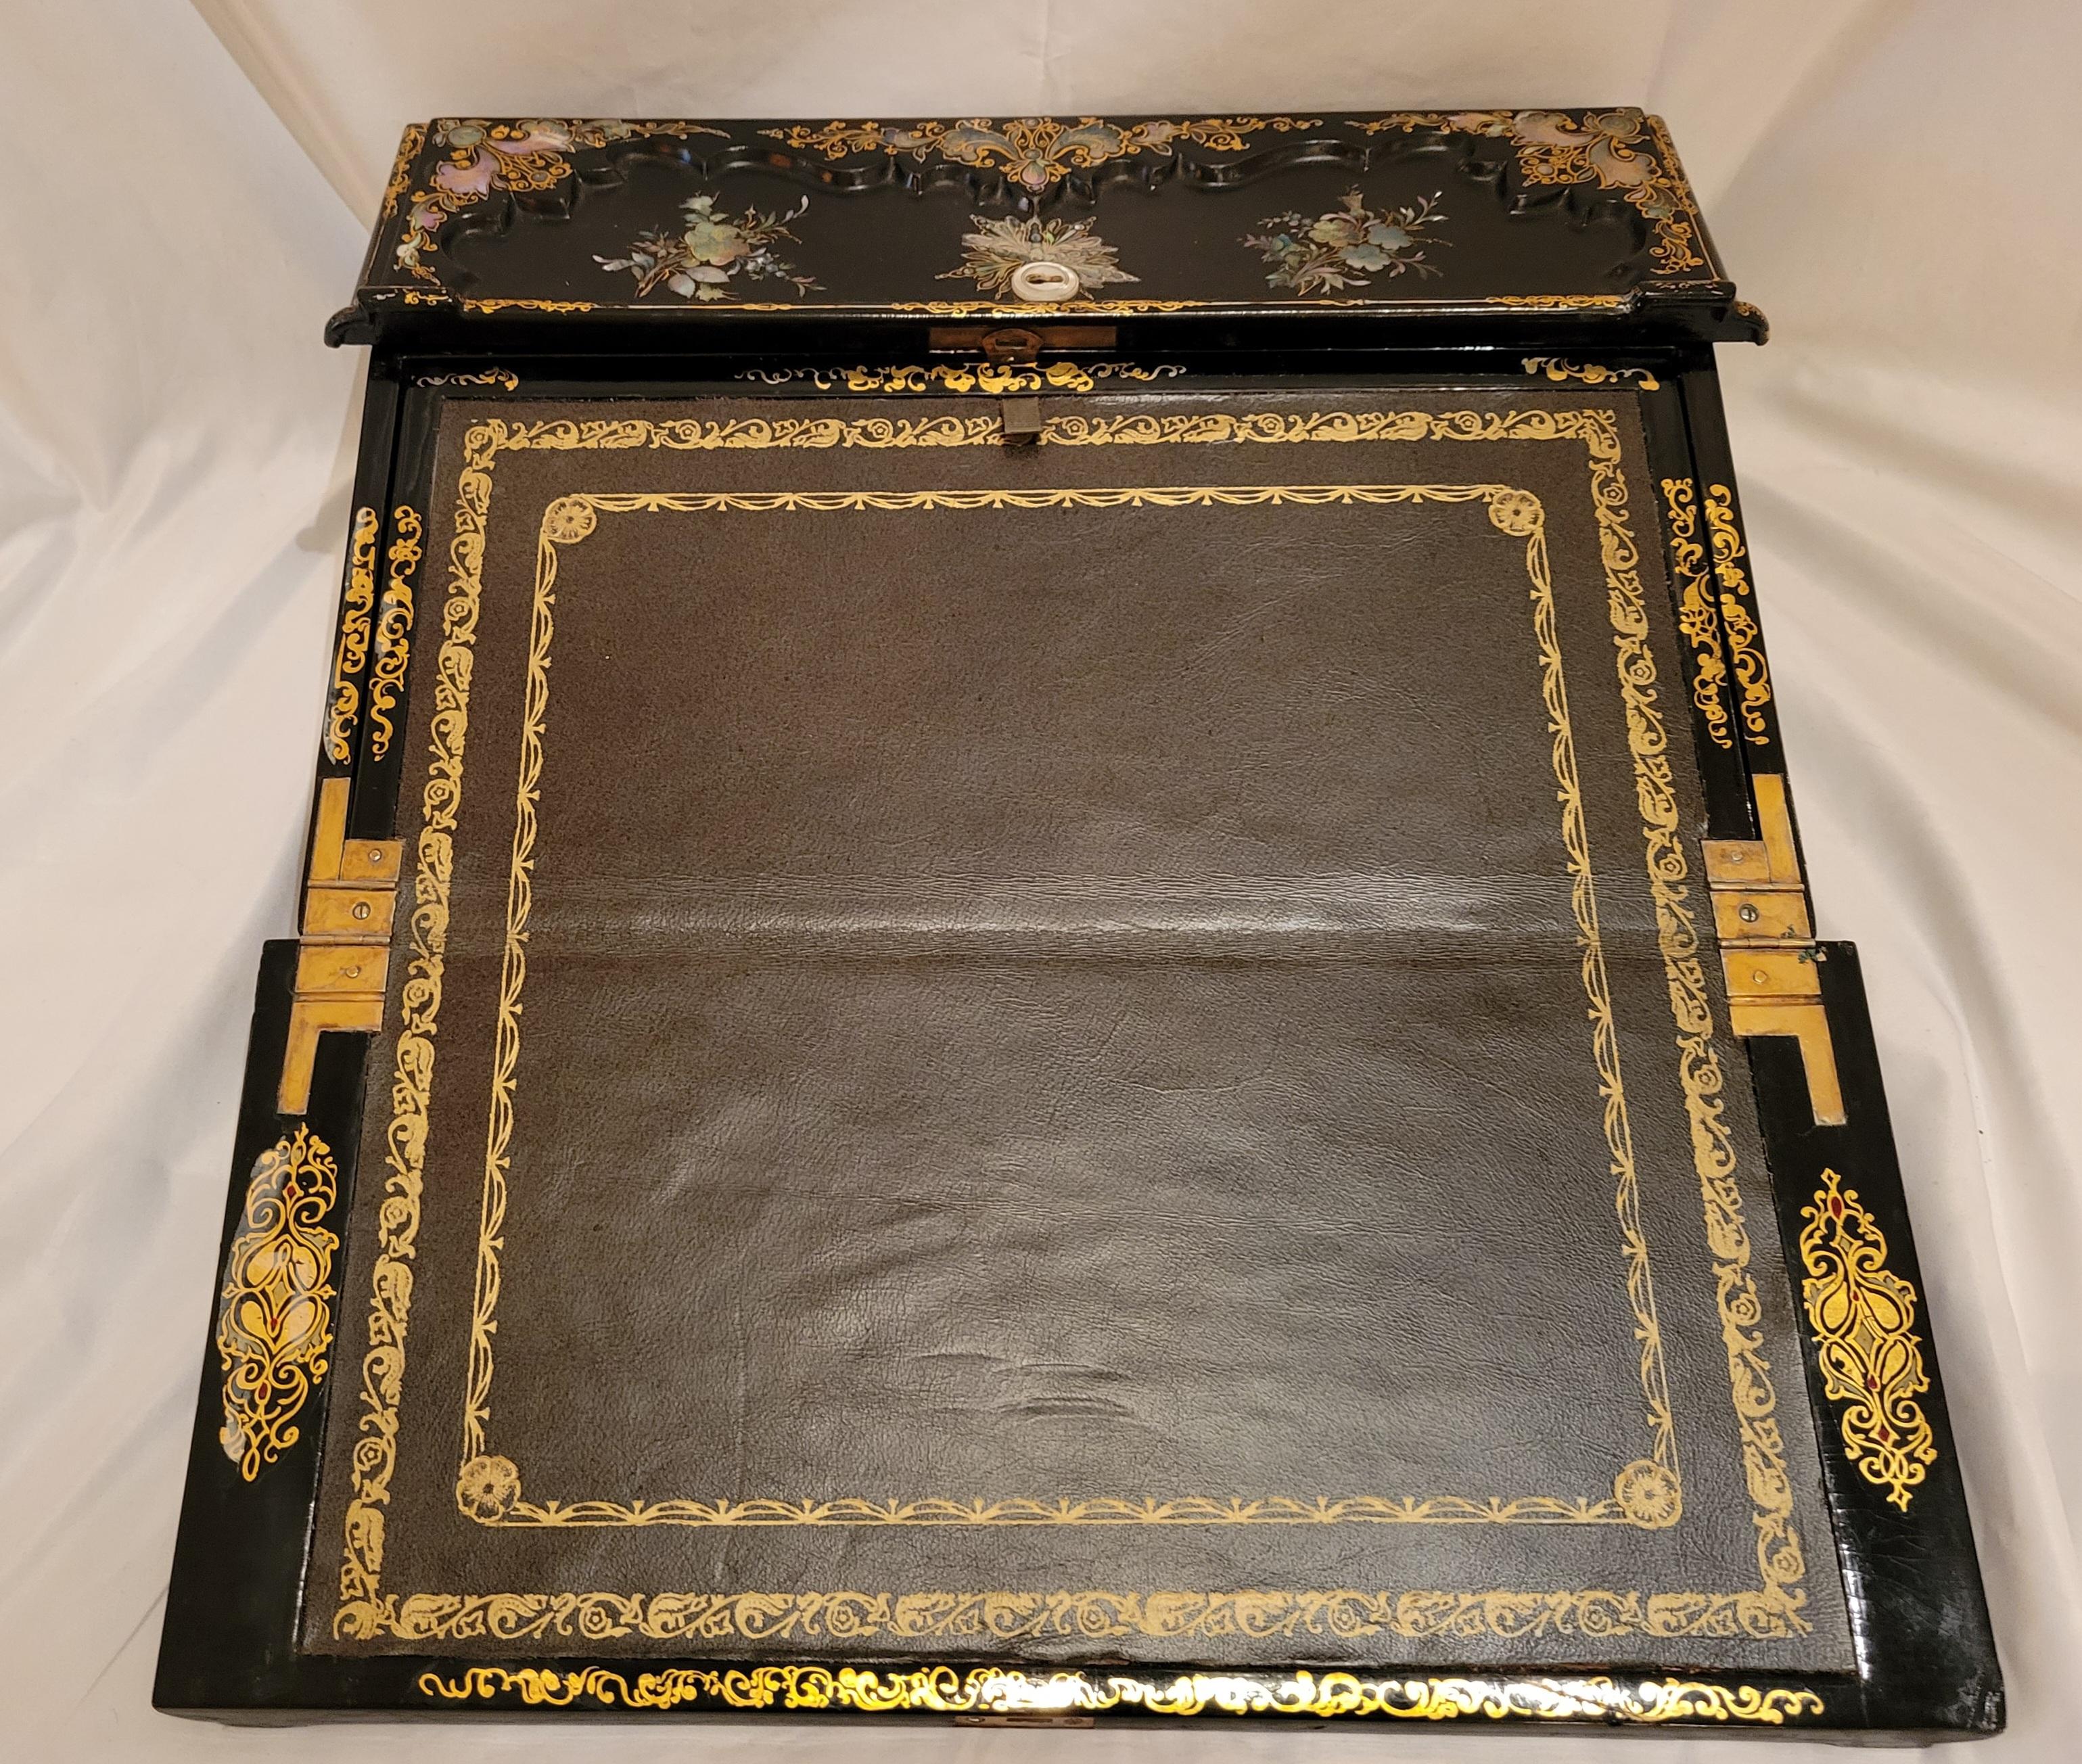 Lacquered Antique English Exceptional Lacquer Mother-of-Pearl Travel Desk, circa 1860-1870 For Sale